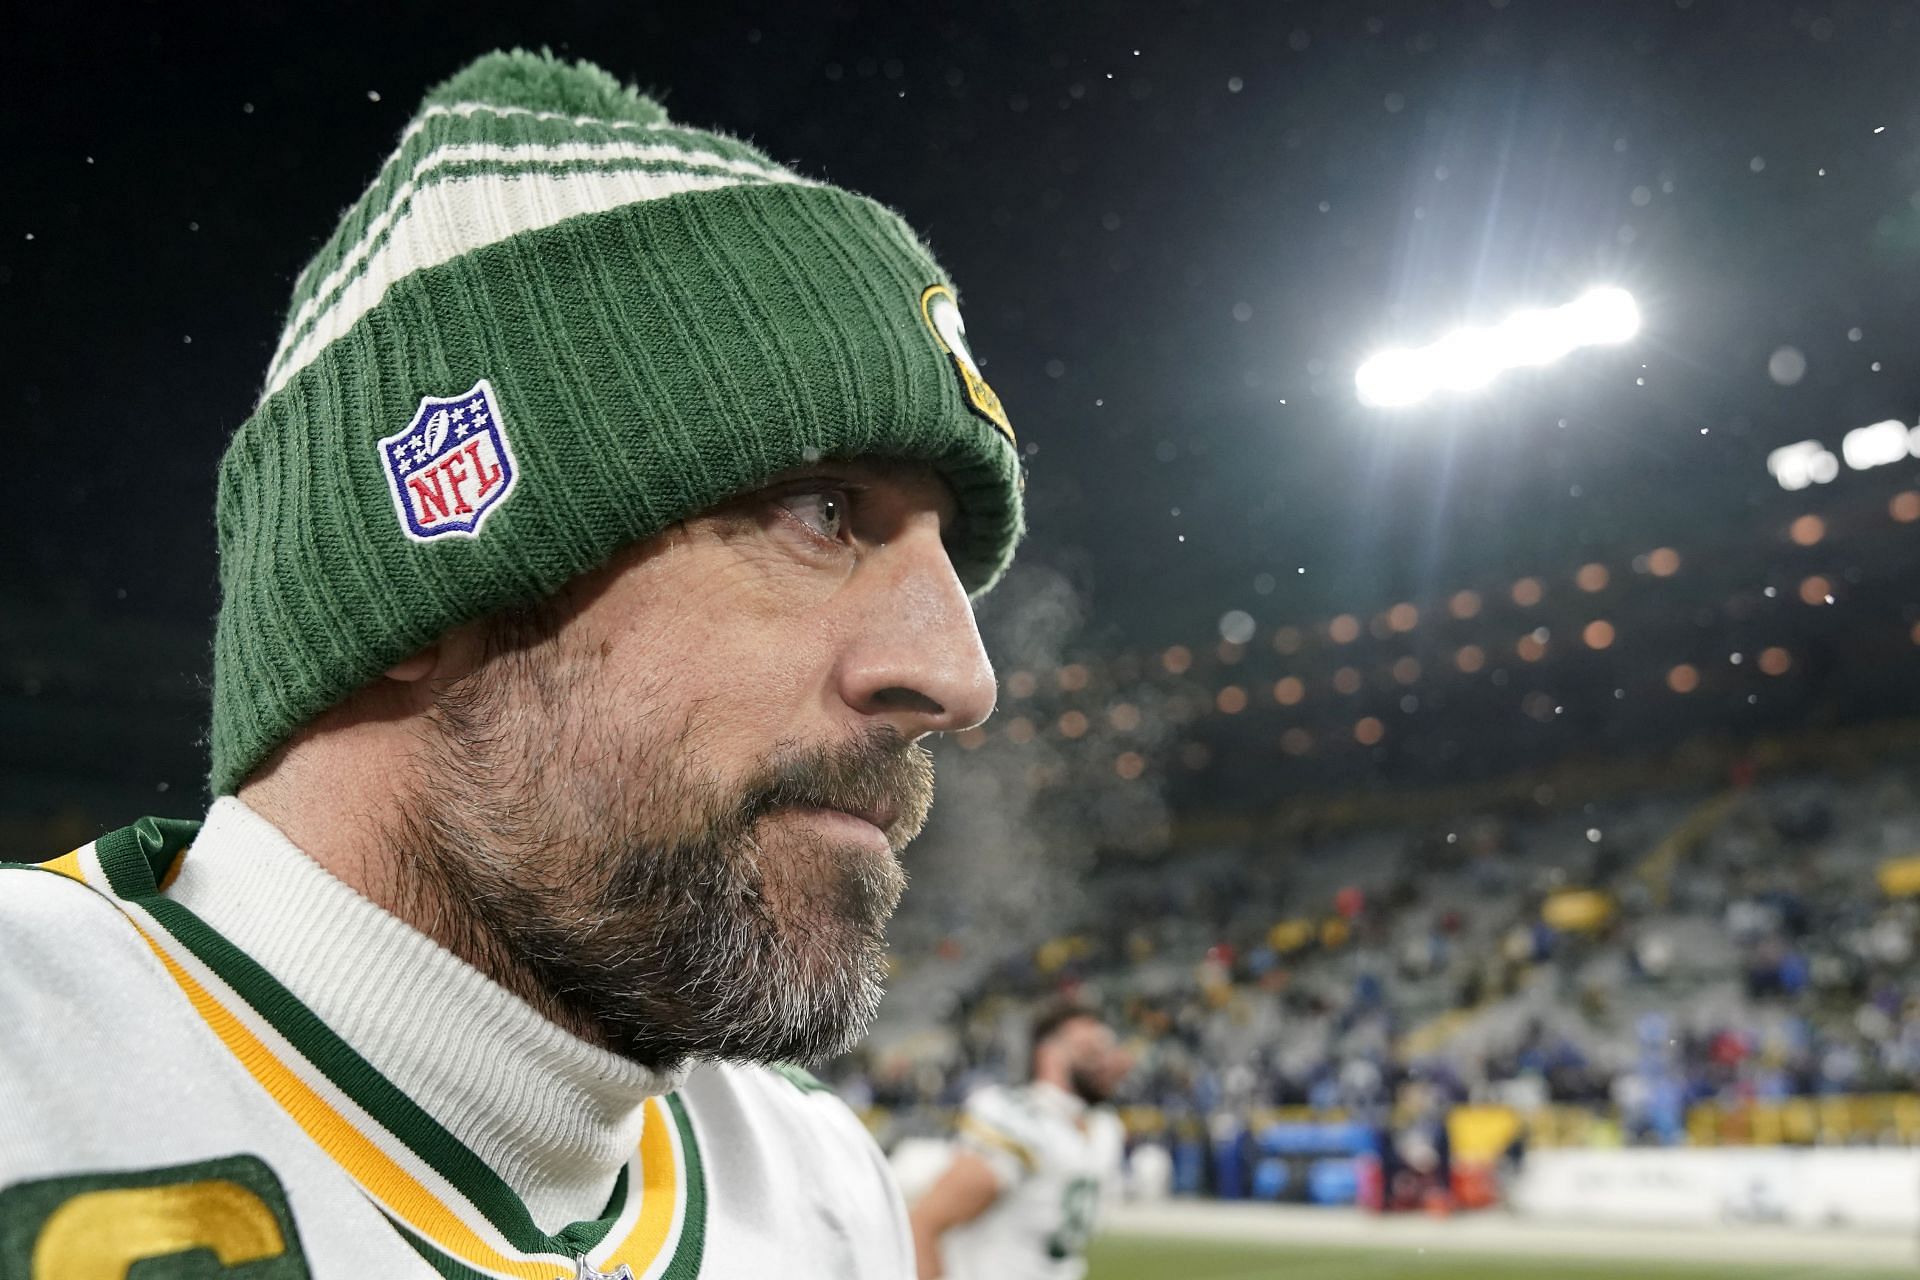 Aaron Rodgers may be in his last NFL season